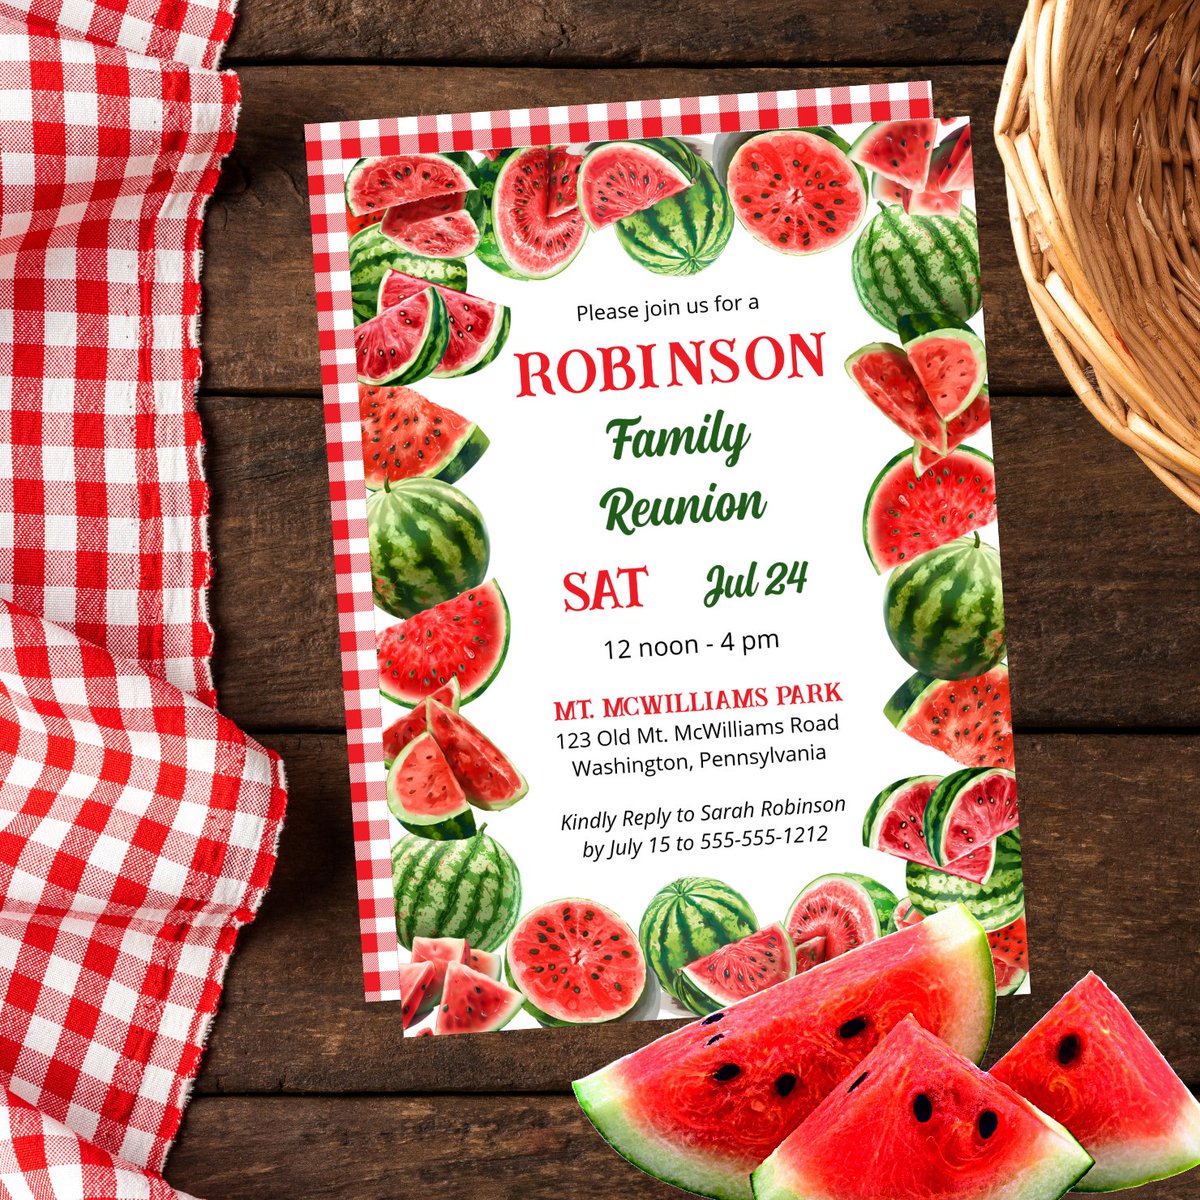 Fresh Summer Watermelons Frame | Back Red and White Gingham Checks Family Reunion Invitation
zazzle.com/summer_waterme…
#familyreunion #watermelons #ginghamchecks #checks #checkered #watermelonframe #familygathering #familycookout #familybbq #familybarbeque #zazzlemade